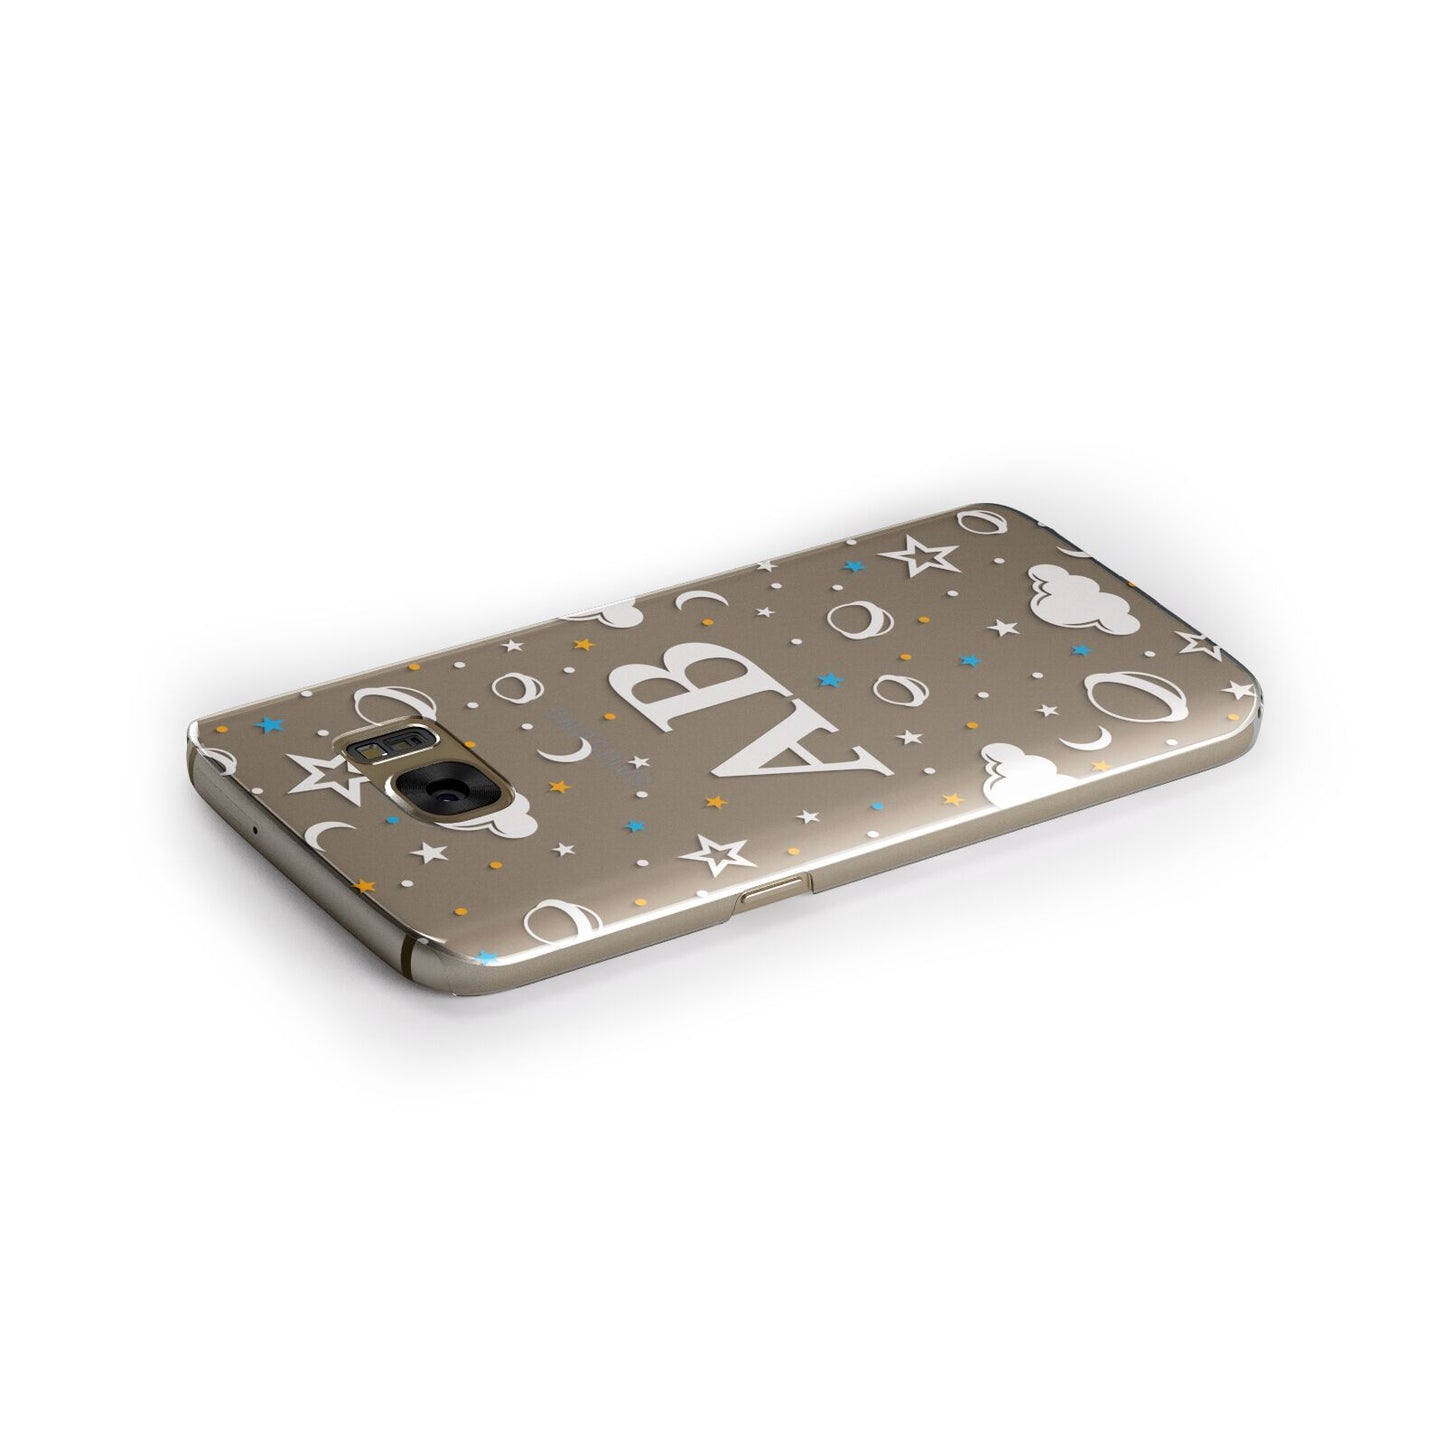 Astronomical Initials Samsung Galaxy Case Side Close Up